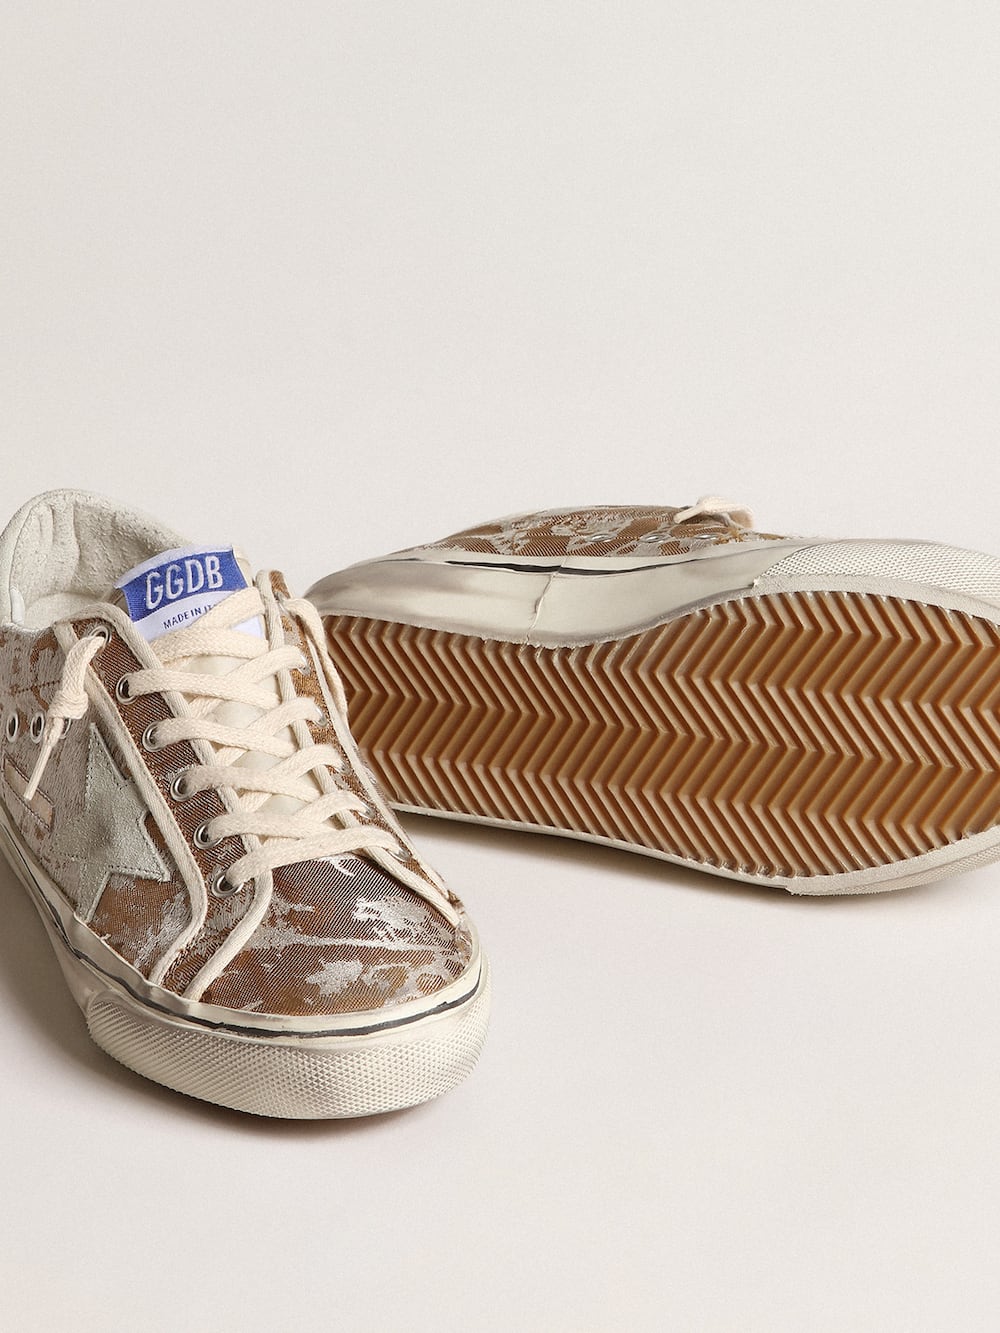 Golden Goose - Hi Star in bronze jacquard fabric with ice-gray suede star in 